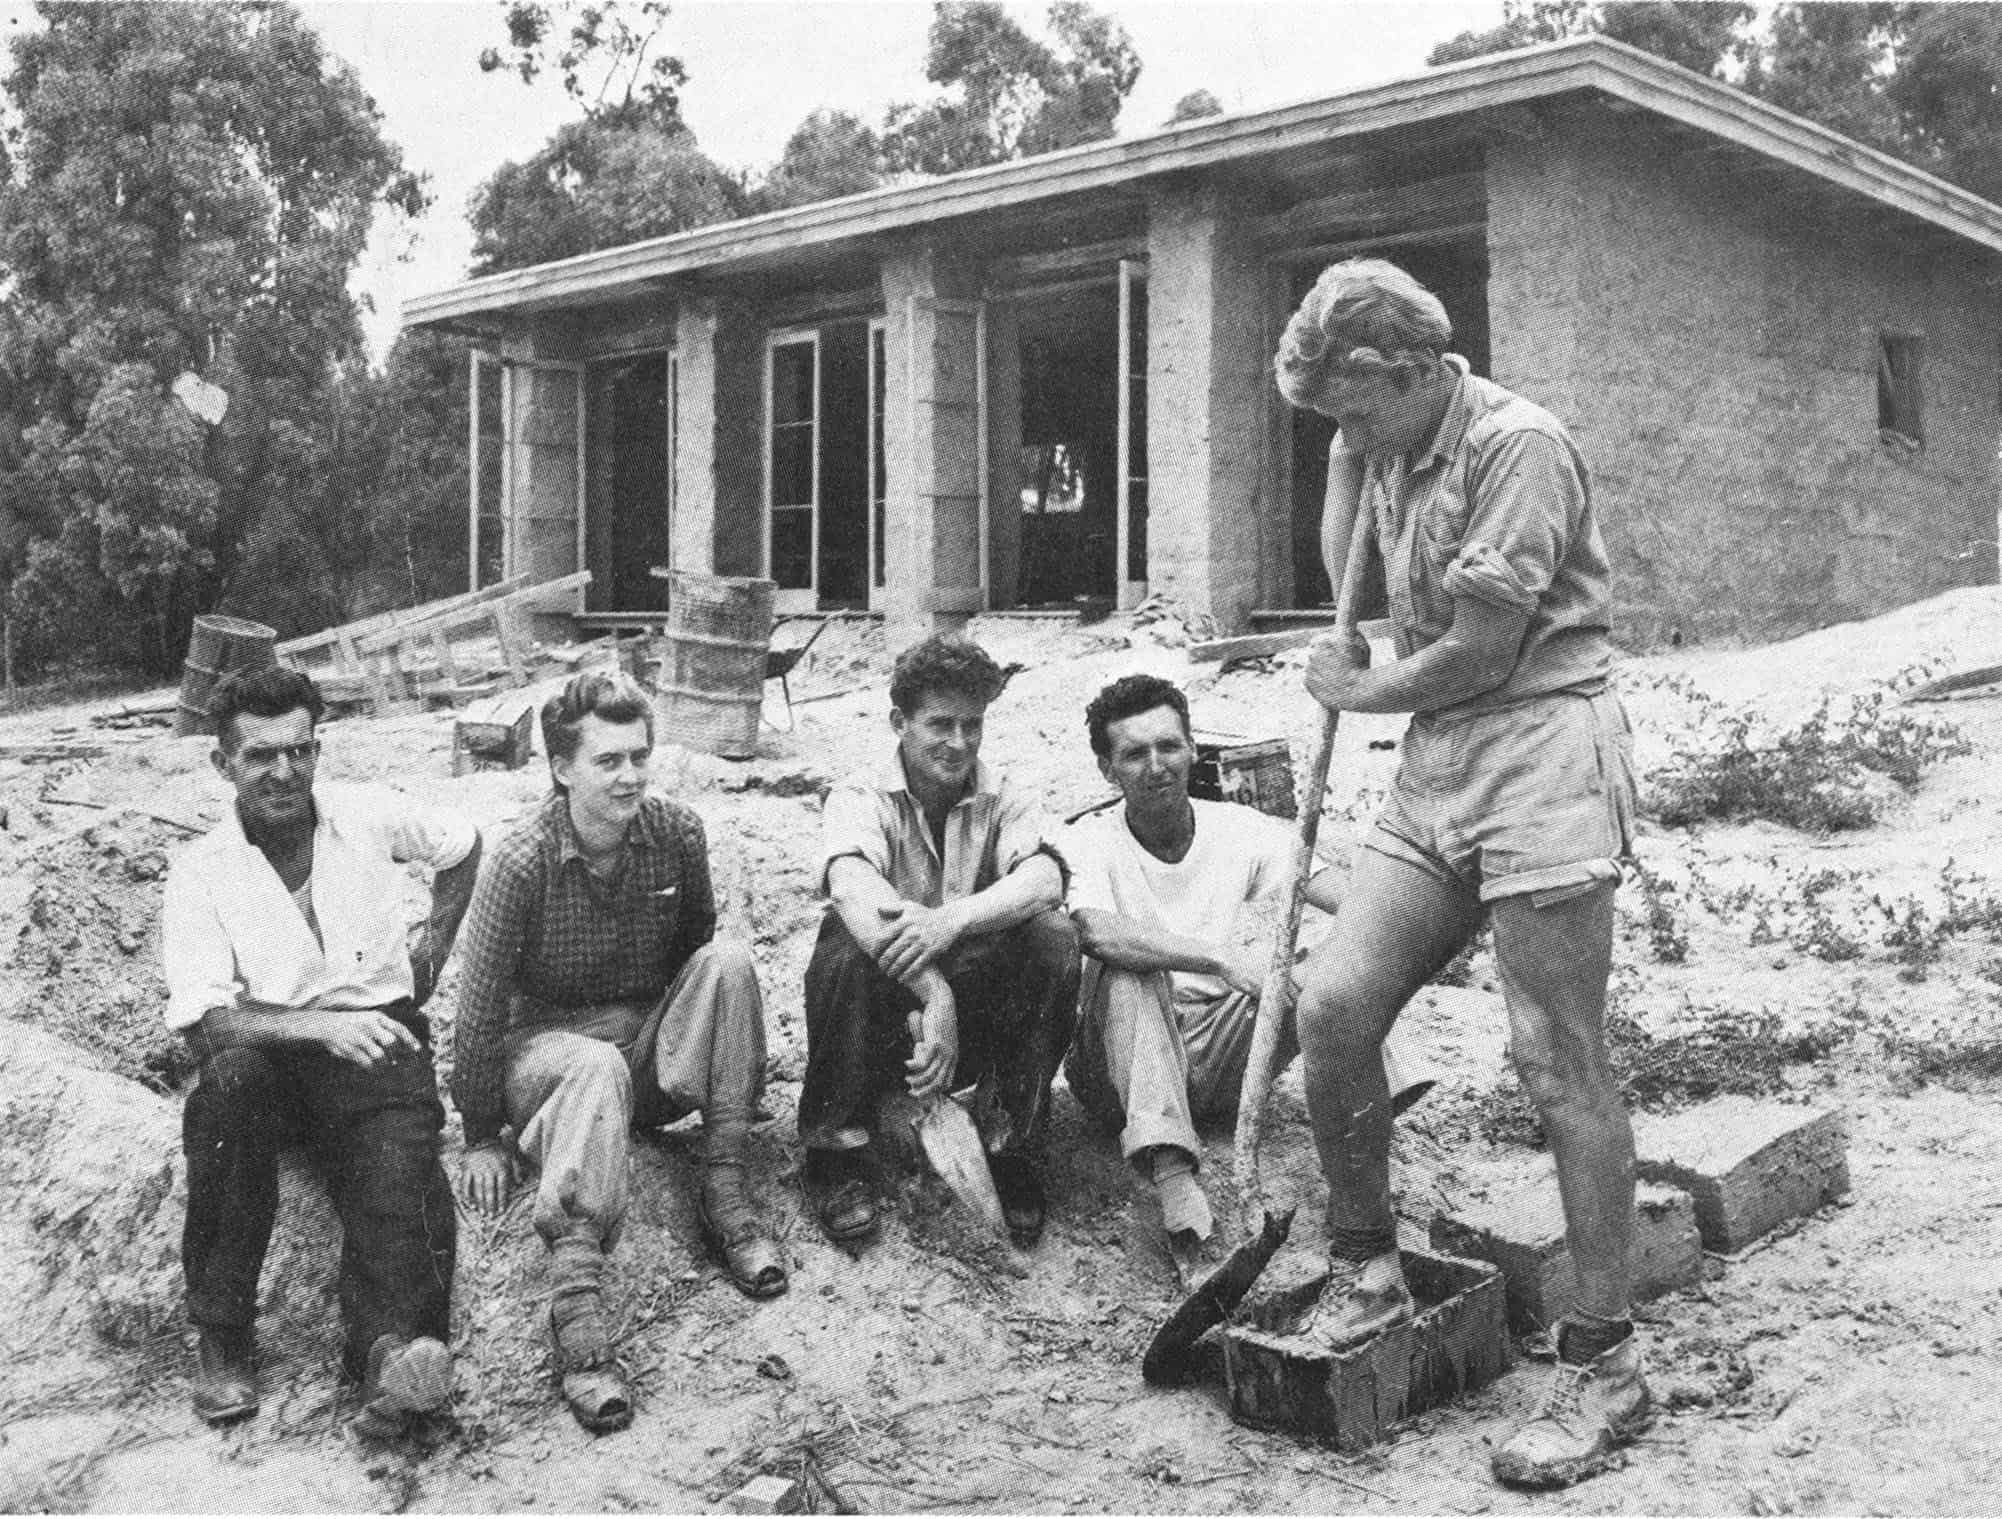 The first mud brick building, 1947. <b>Left to Right</b>: L.Mayfield, carpenter; Sonia Skipper; Alistair Knox; Tony Jackson; Gordon Ford with the English house in the background